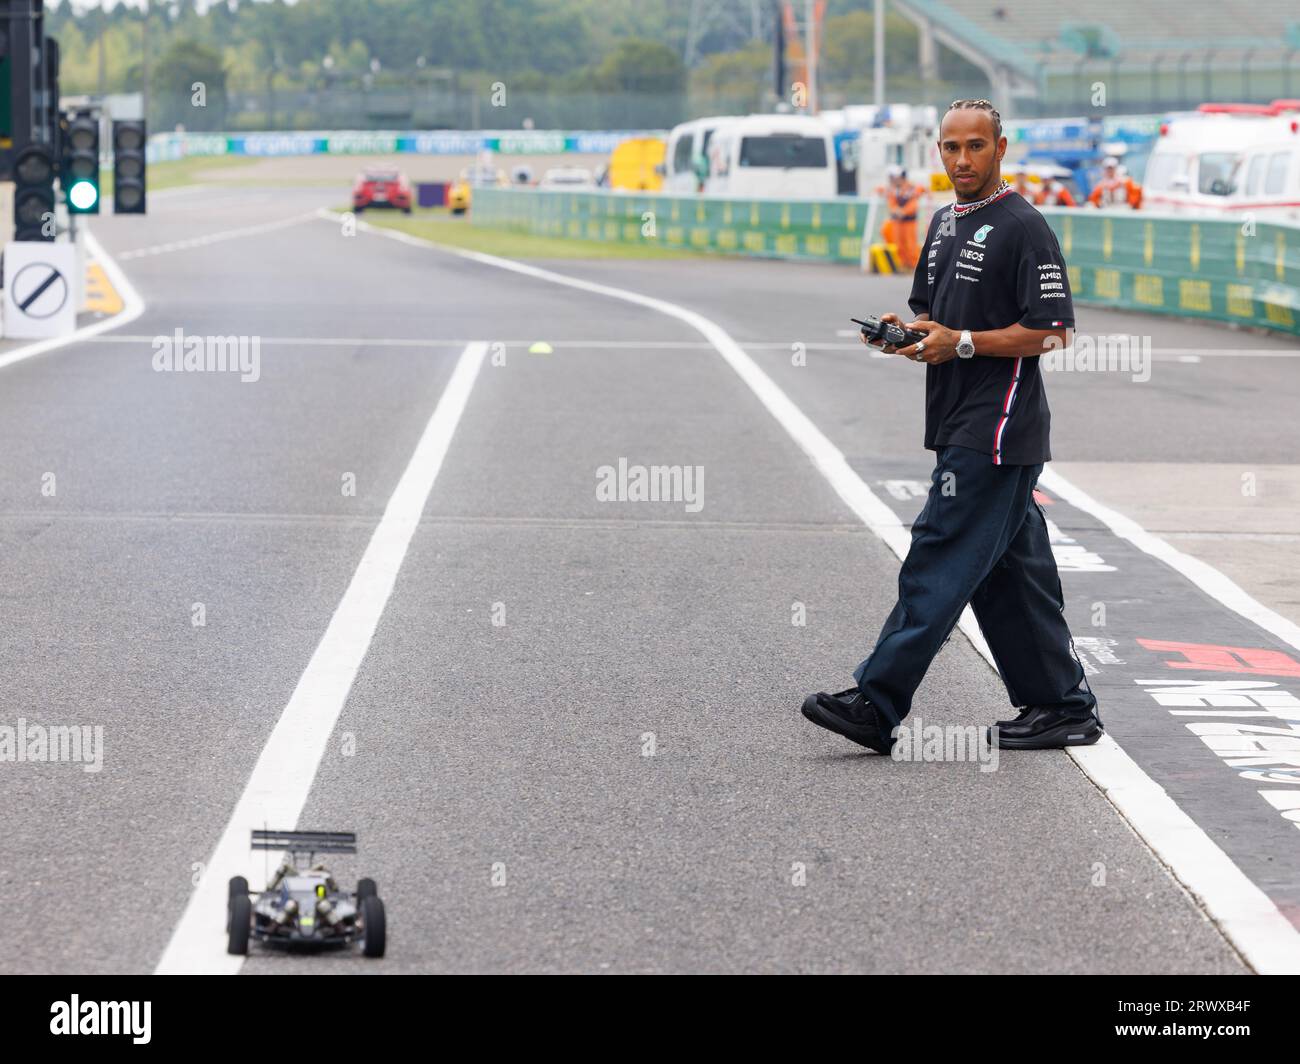 Suzuka Grand Prix Circuit, 21 September 2023: Lewis Hamilton (GBR) of team Mercedes operates a remote controlled car in a race with Esteban Ocon (FRA) of team Alpine during the 2023 Japan Formula 1 Grand Prix. corleve/Alamy Live News Stock Photo